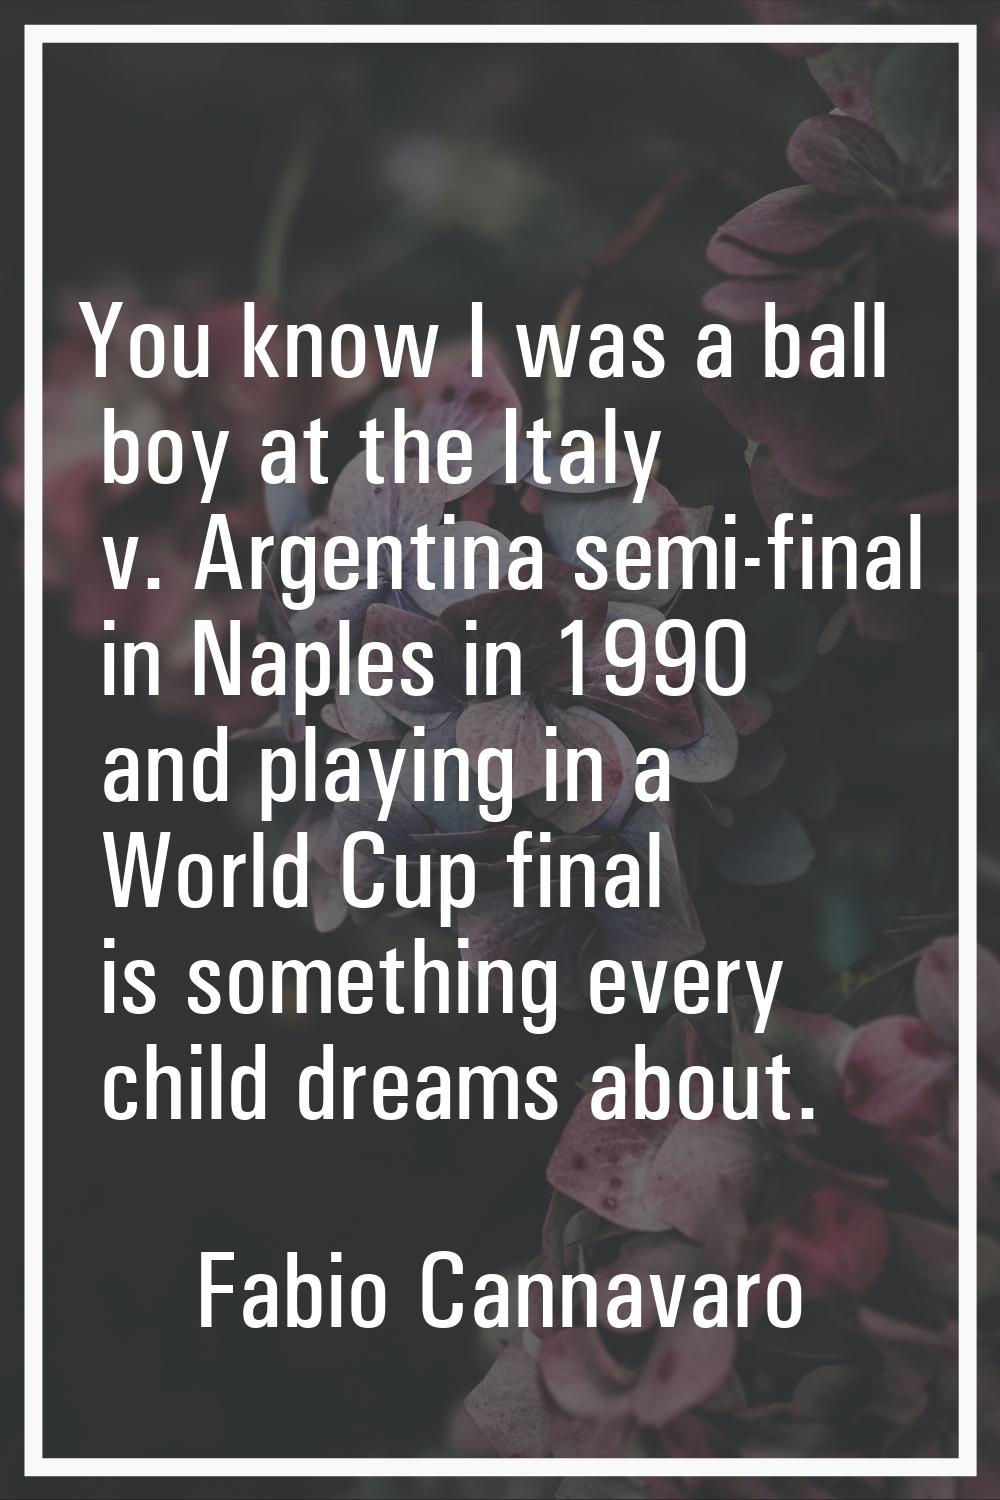 You know I was a ball boy at the Italy v. Argentina semi-final in Naples in 1990 and playing in a W